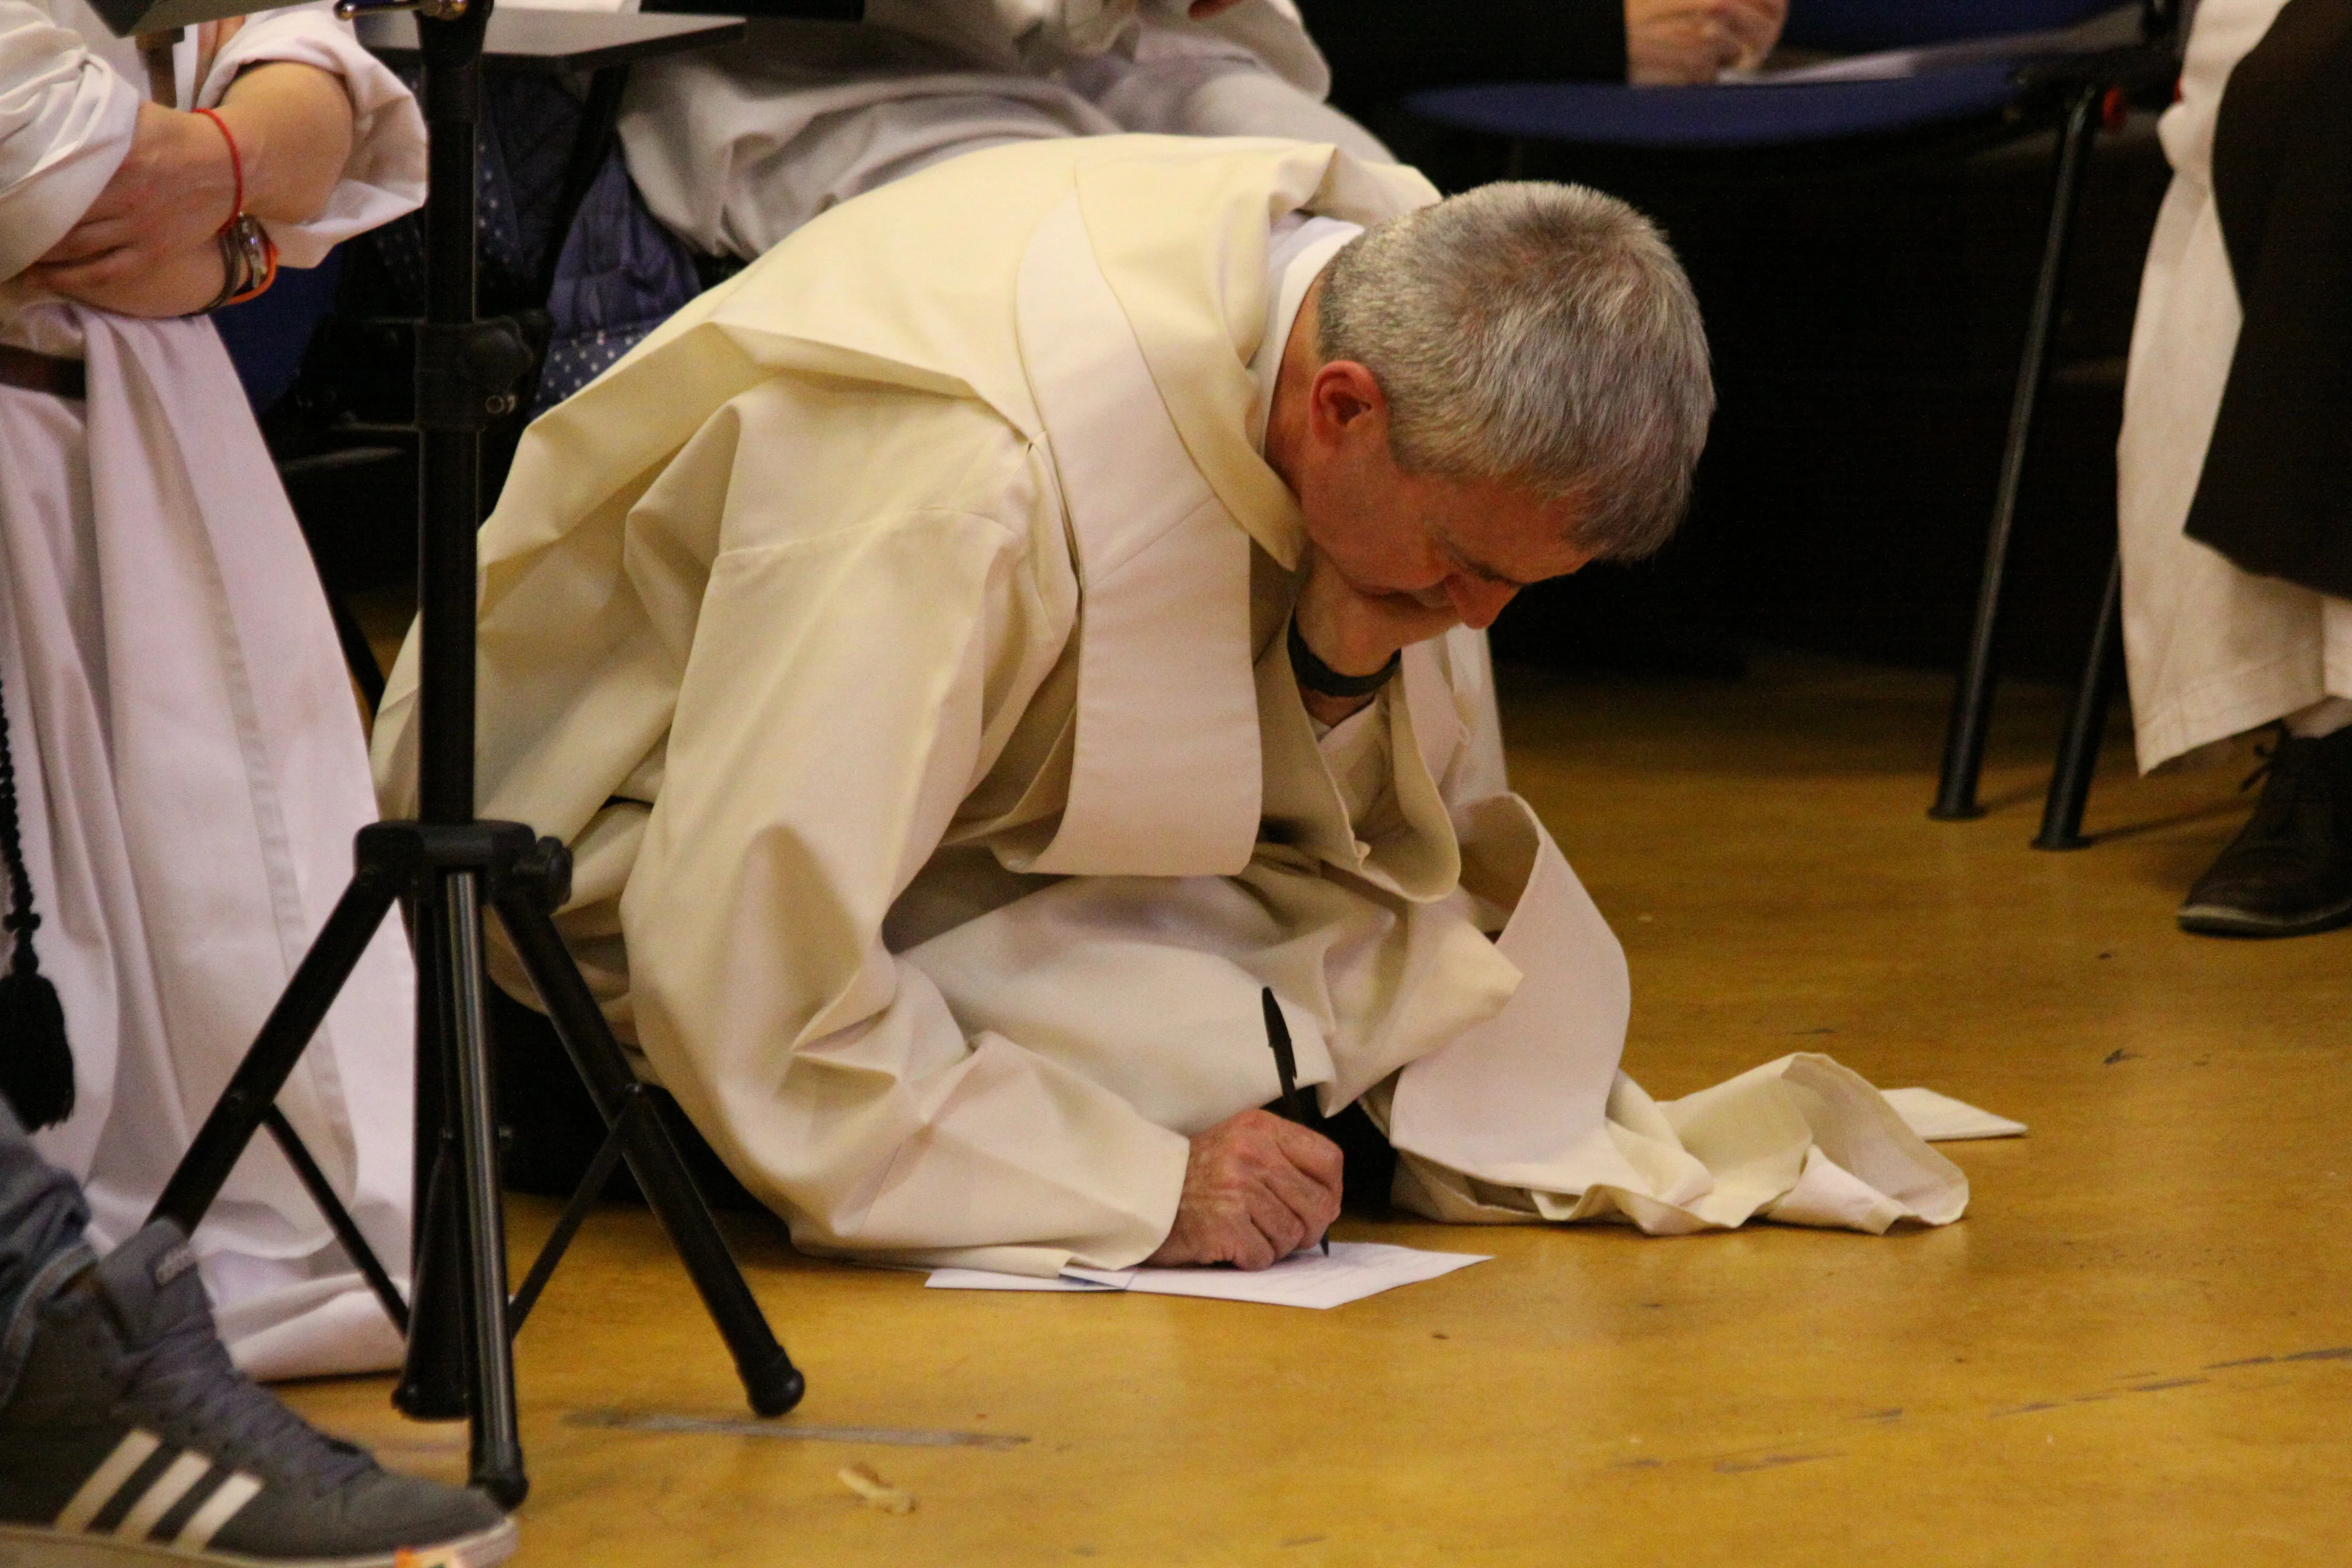 A priest writing a letter to St. Therese of Lisieux during a "rose petals" evening of prayer in Vismara, province of Milan, Italy, September 2017.?w=200&h=150